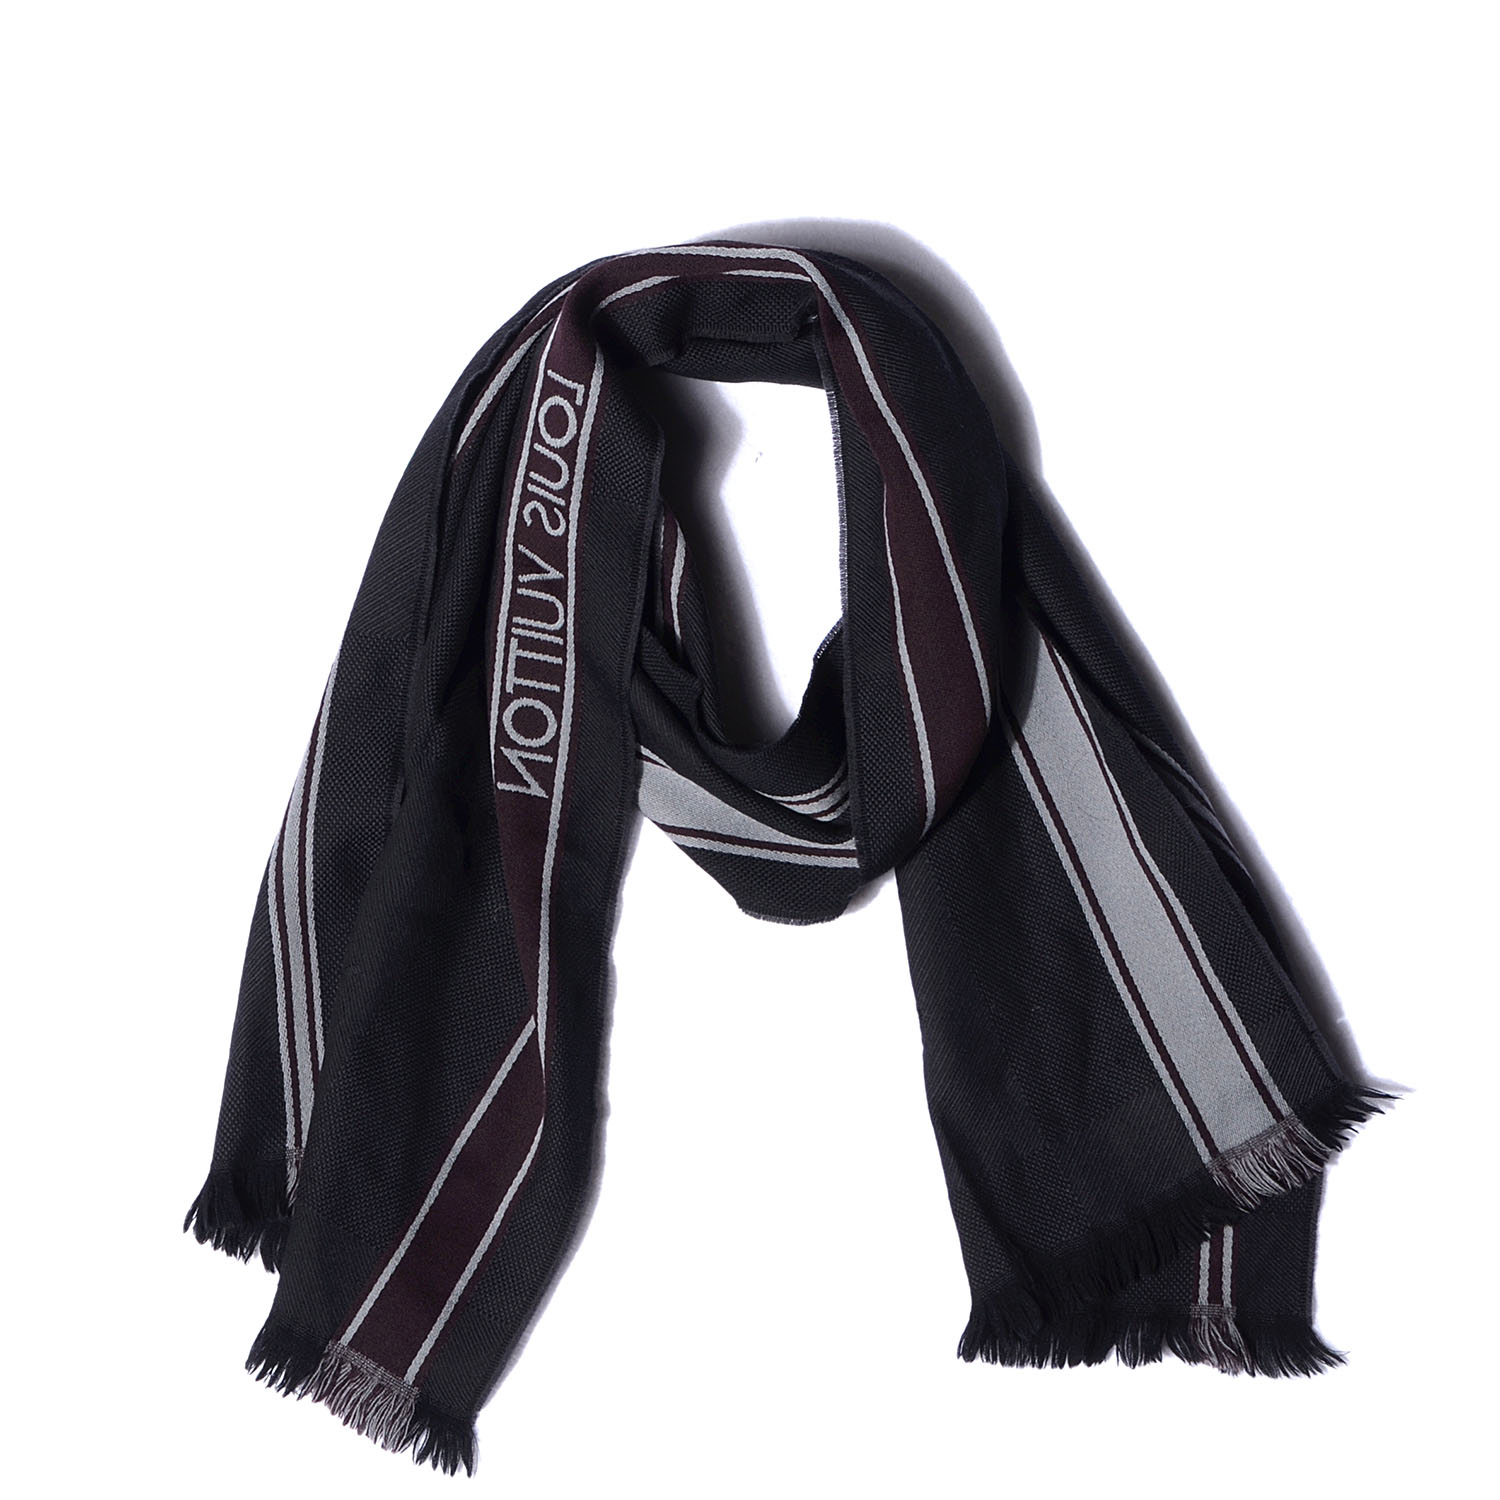 louis vuitton karakoram blanket scarf - the most beautiful thing I have  seen in mens …